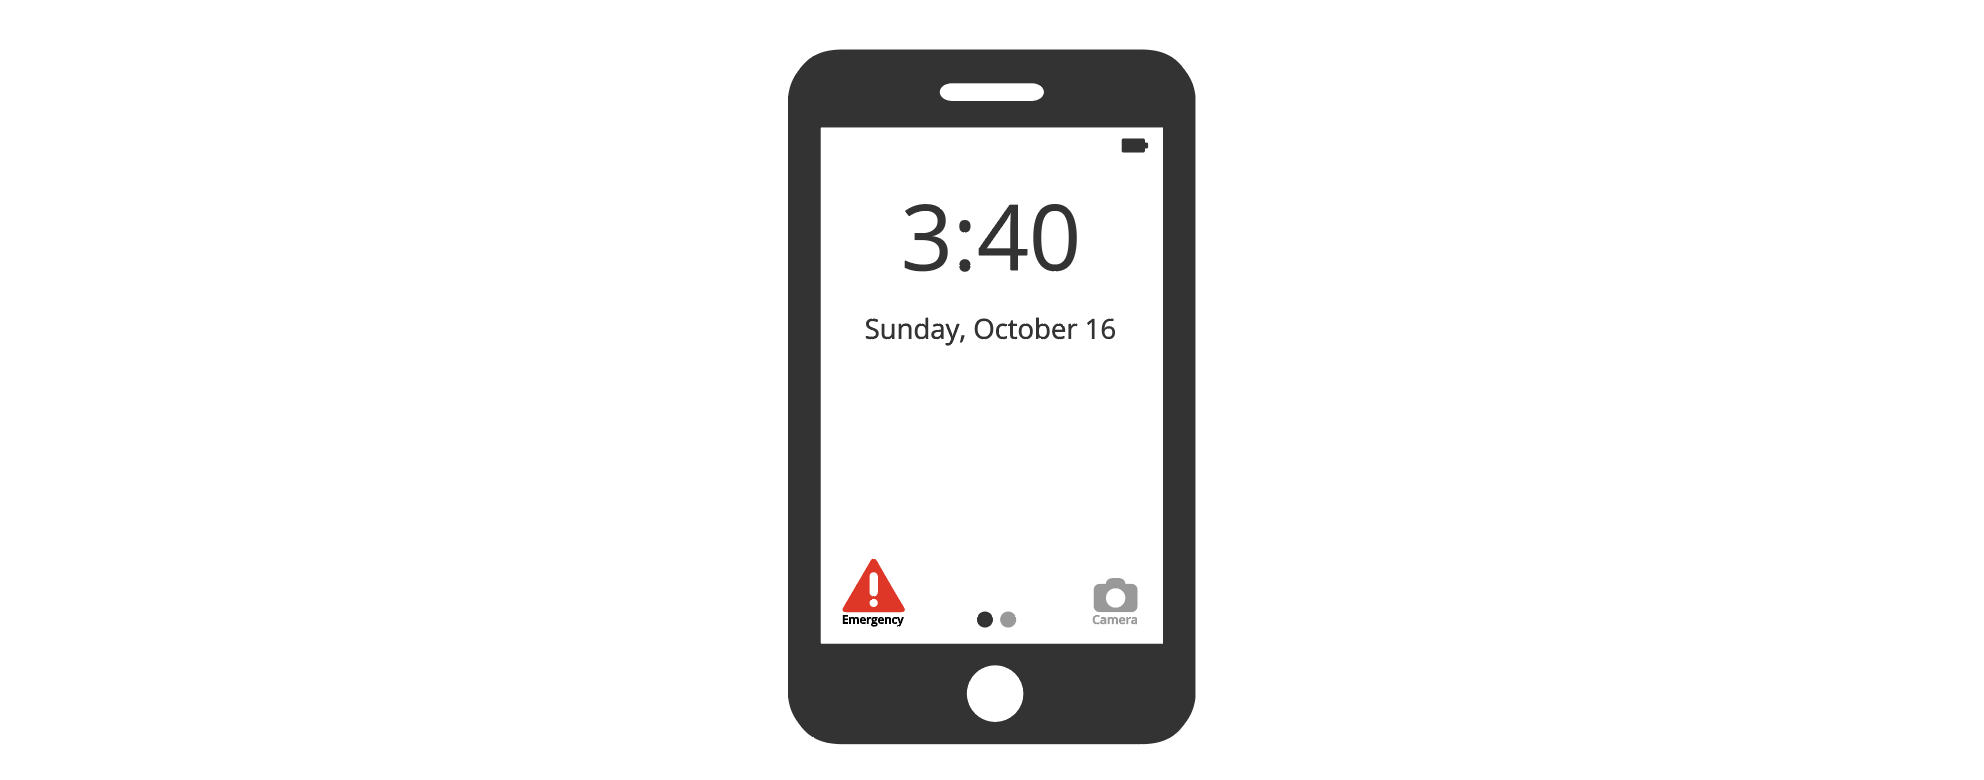 Illustration of an iPhone with an emergency symbol in home screen view